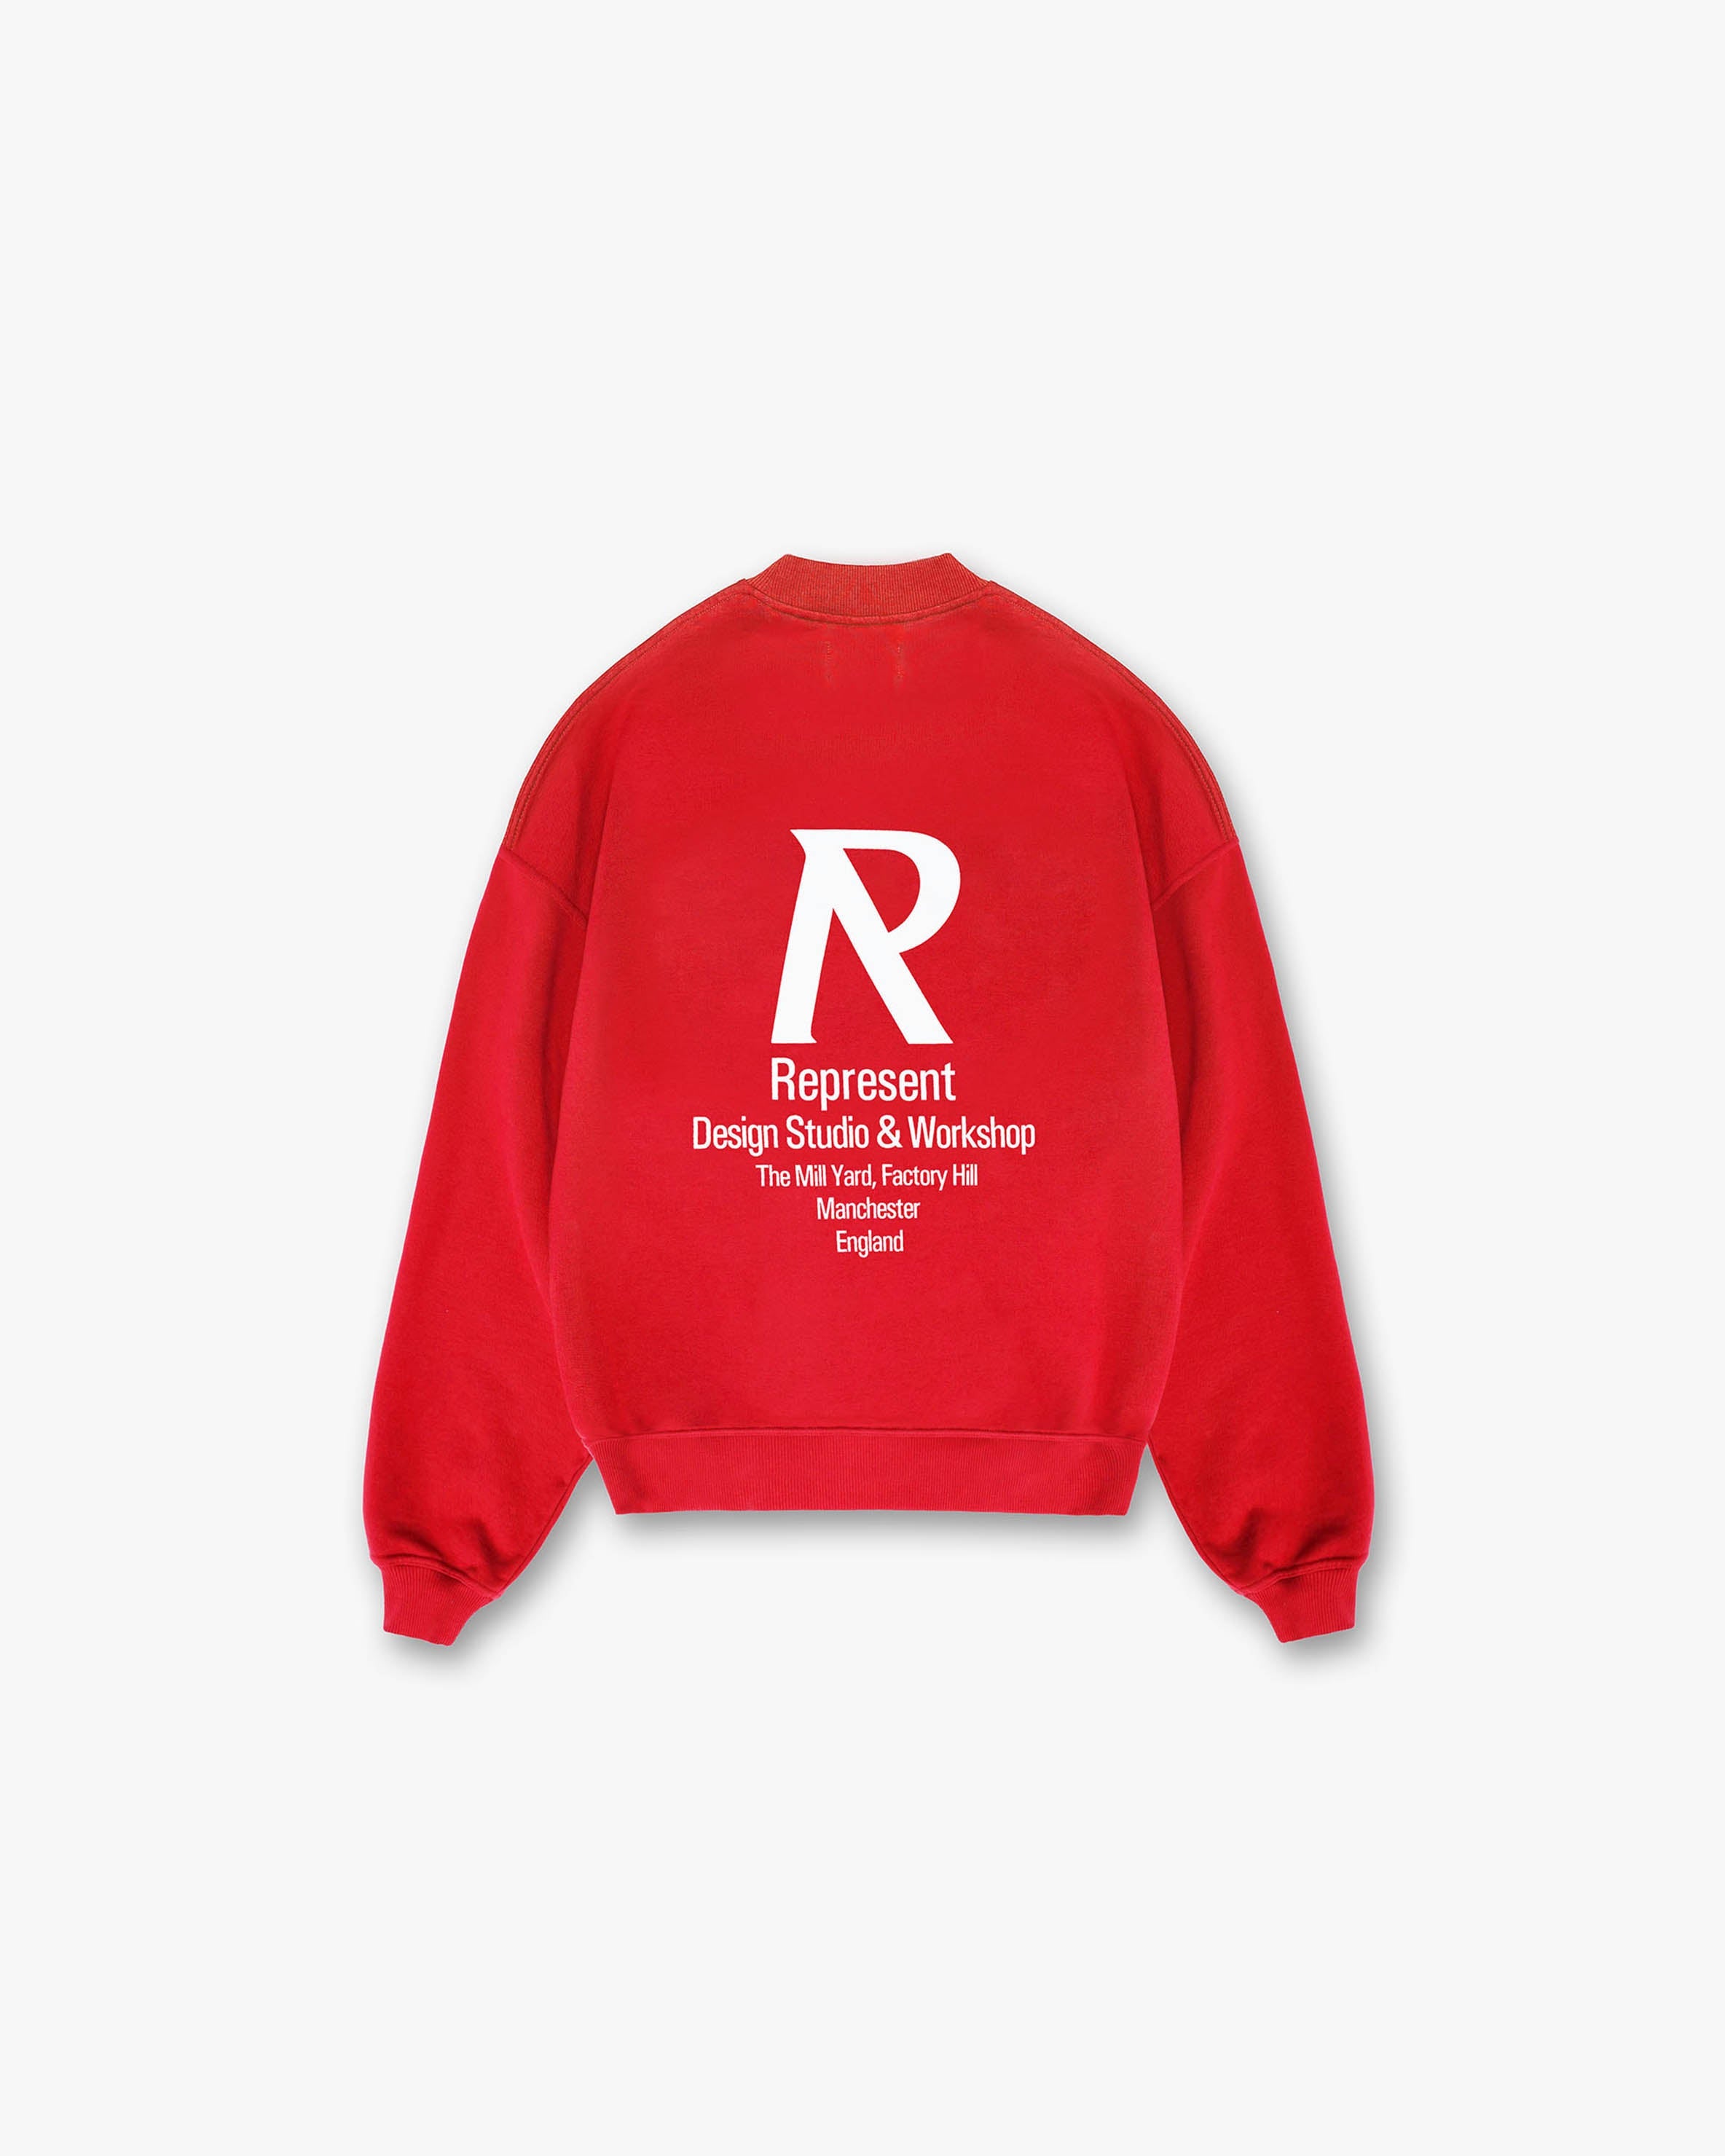 Initial Sweater - Racing Red